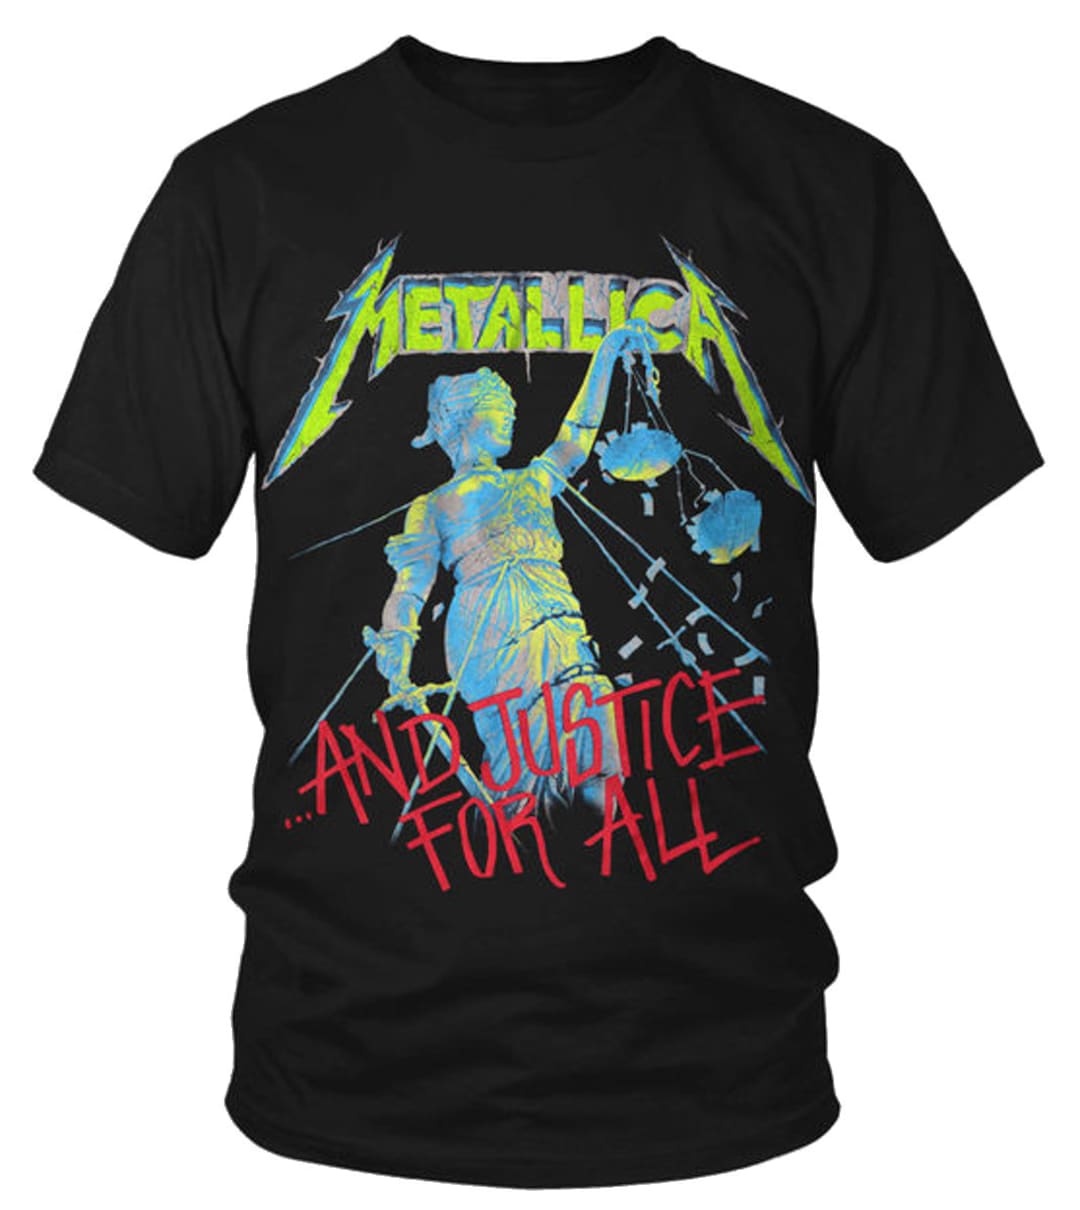 Metallica and Justice for All original T Shirt 